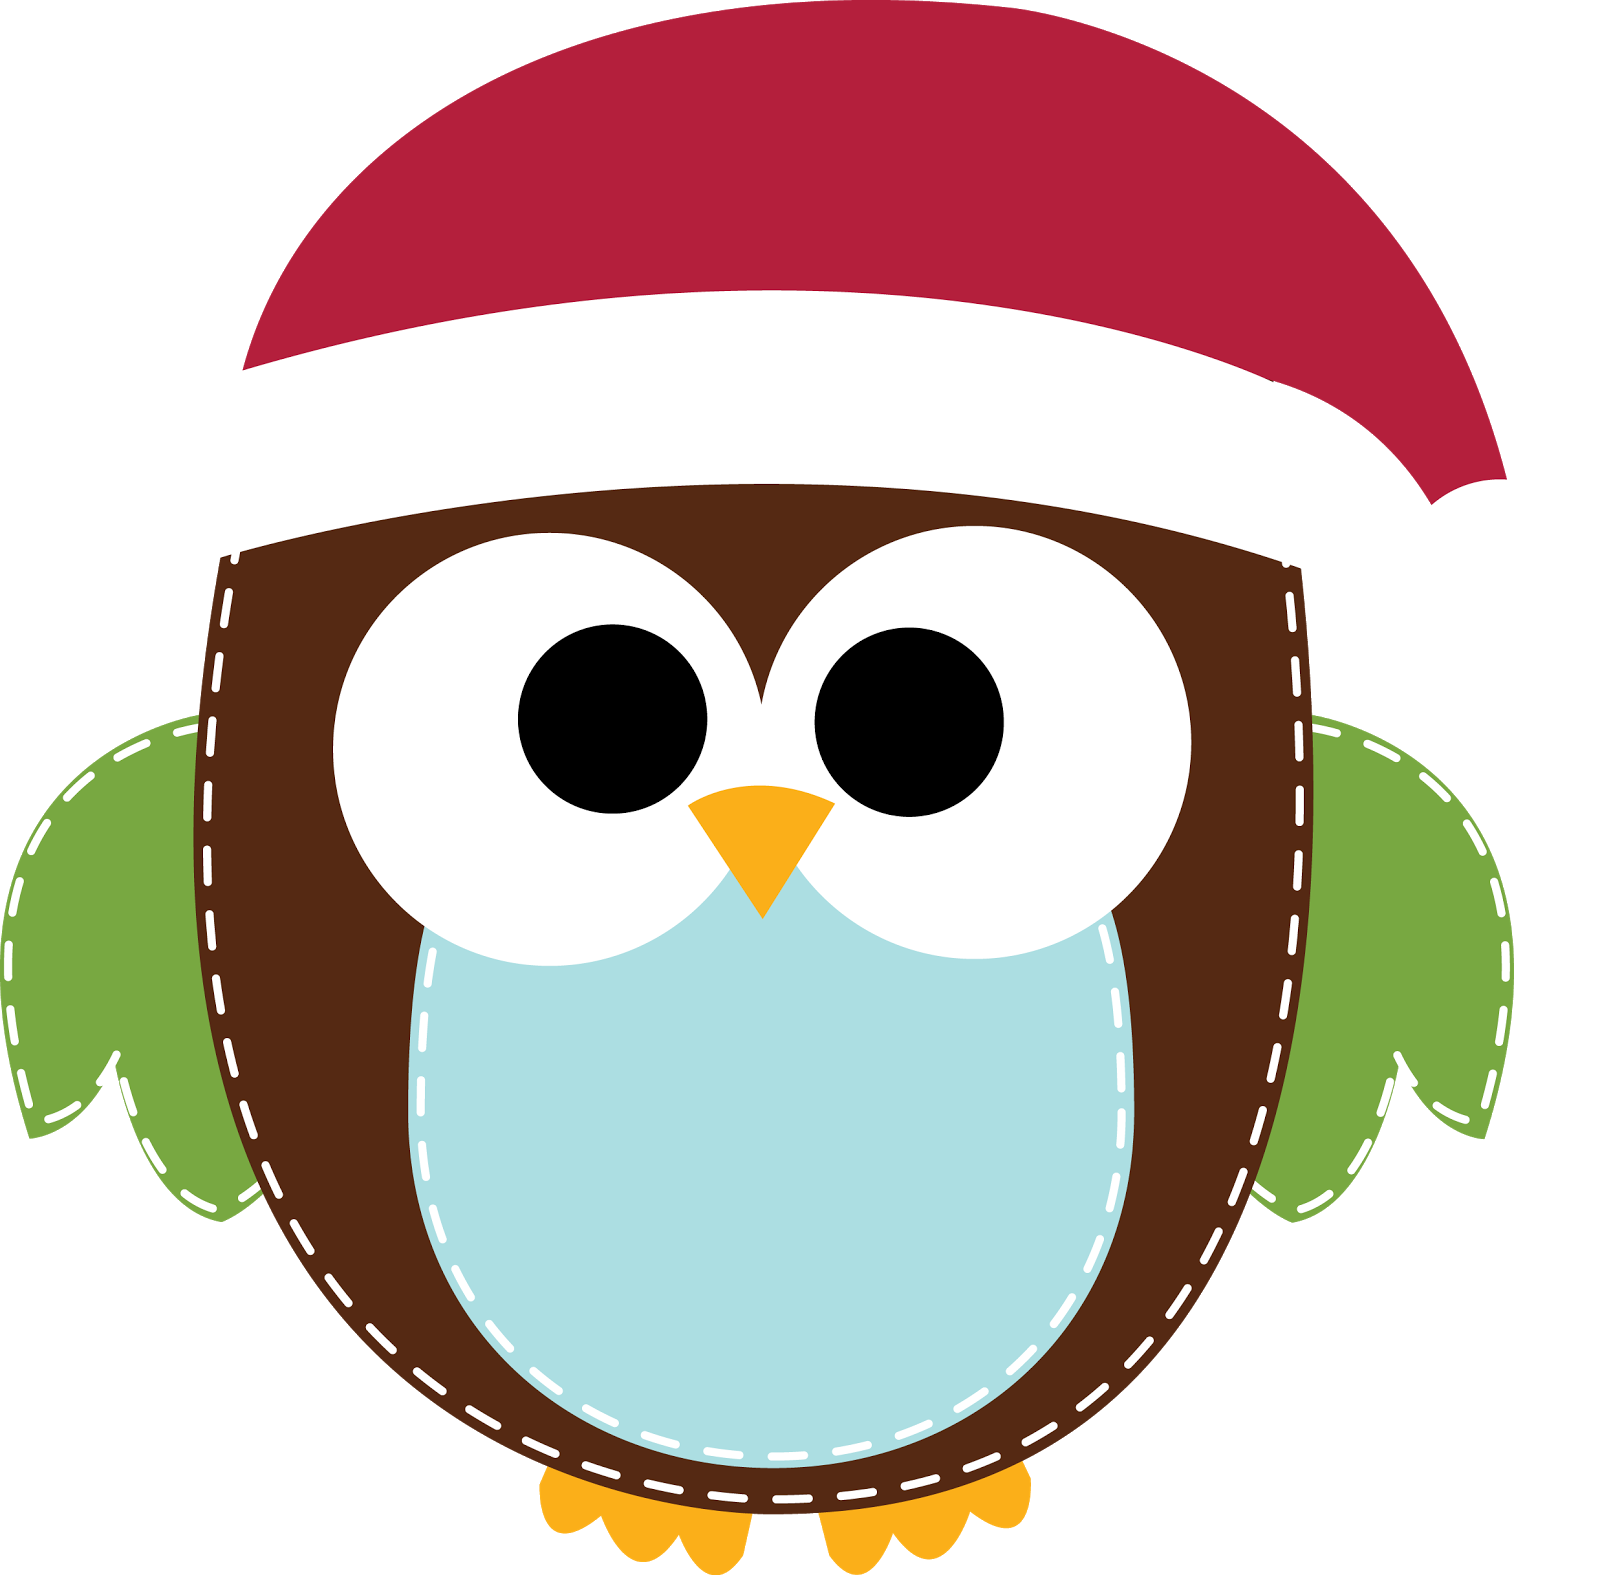 Owls clipart christmas. Free winter holiday download